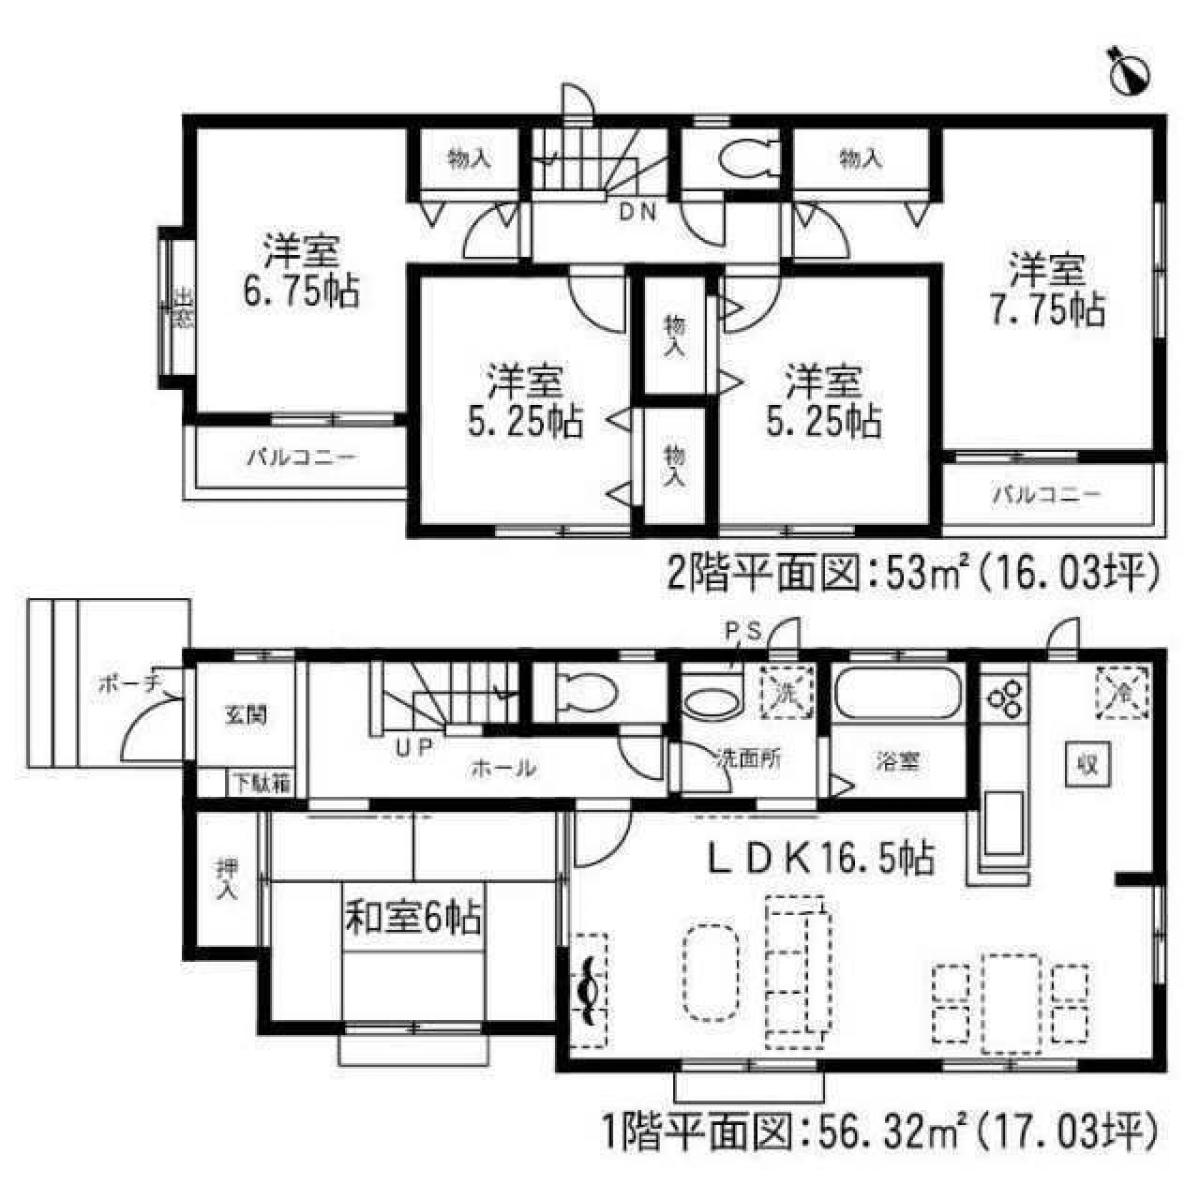 Picture of Home For Sale in Hino Shi, Tokyo, Japan